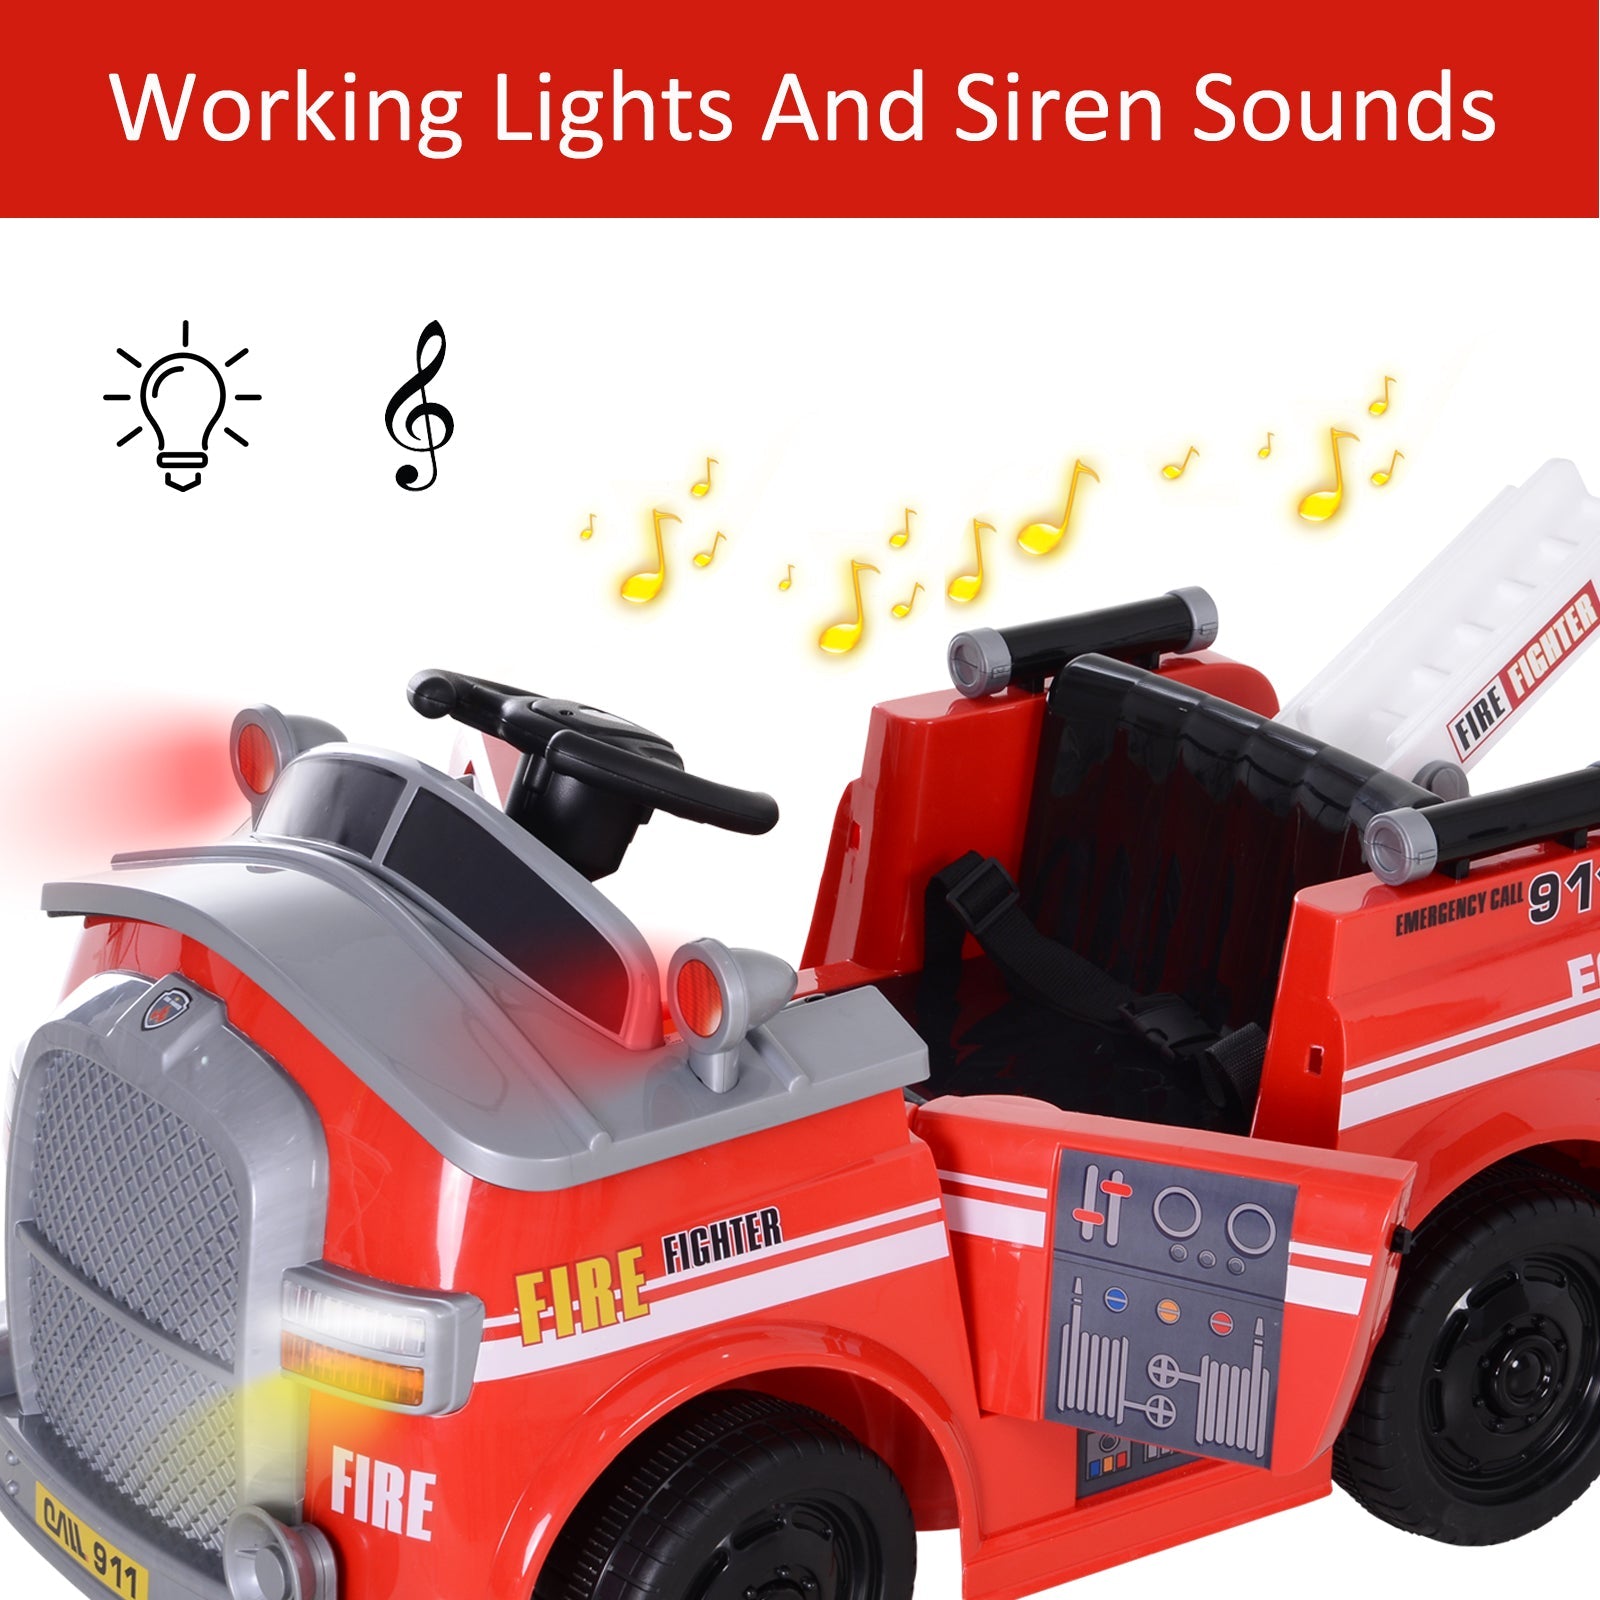 6V Kids Ride-On Car Fire Truck Pretend Play Toy Car with Parental Remote Control, Safety Belt, Realistic Lighting, working steering wheels, horn and lift ladder (Red) at Gallery Canada